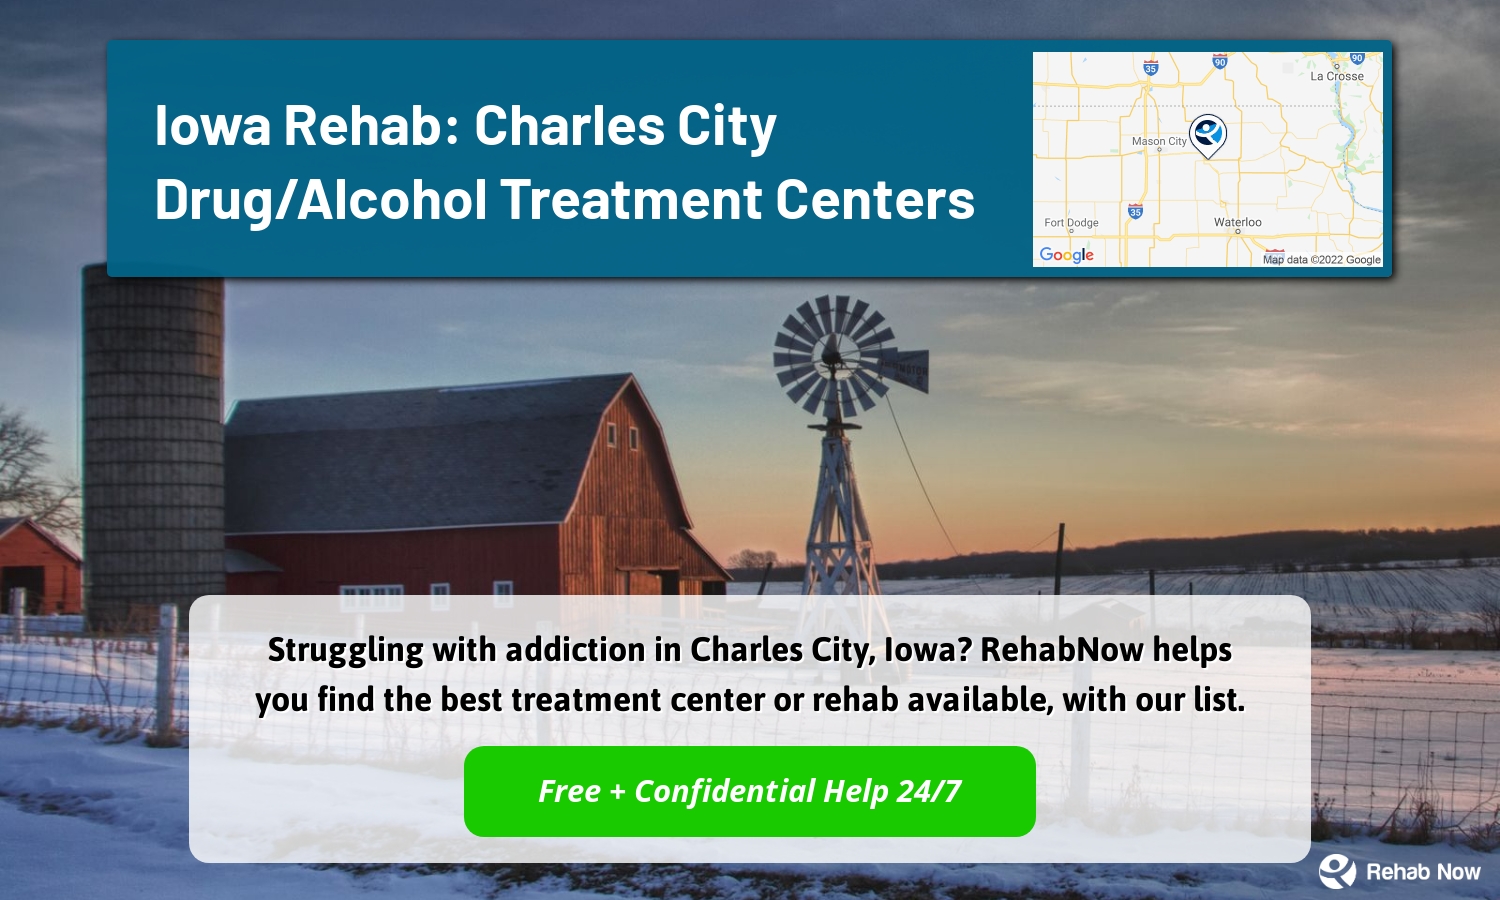 Struggling with addiction in Charles City, Iowa? RehabNow helps you find the best treatment center or rehab available, with our list.